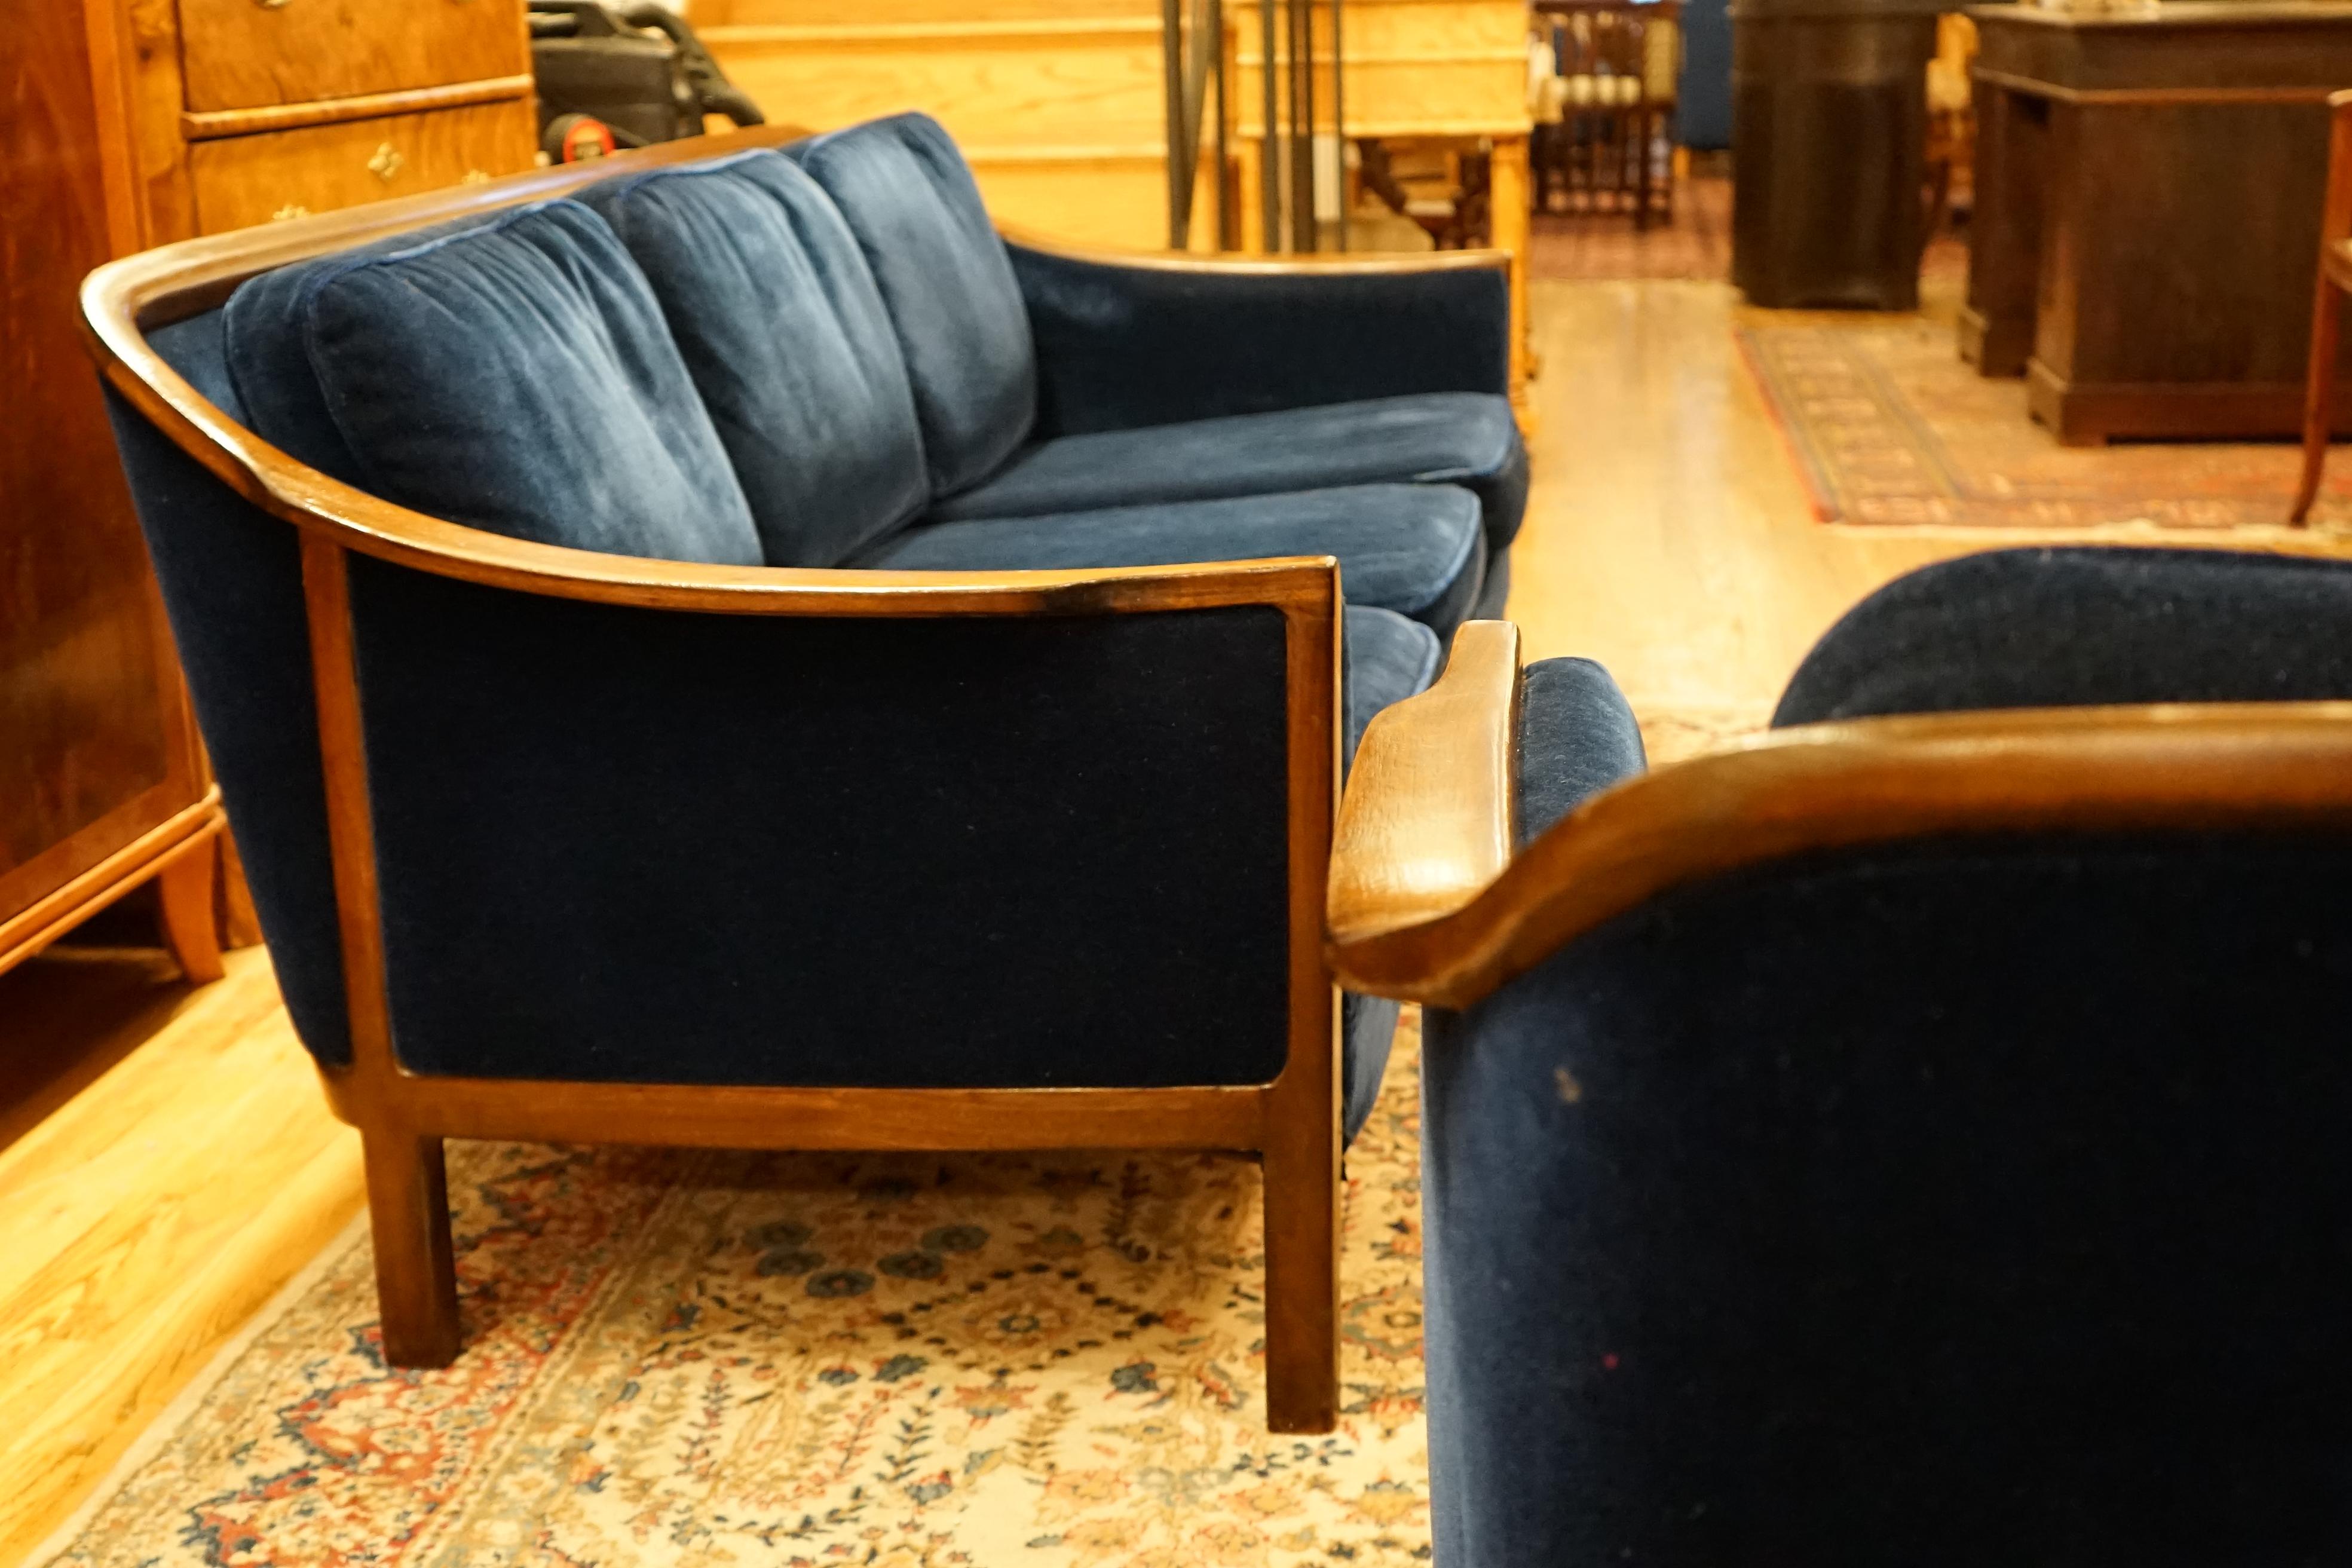 Suitable for a cocktail or entertainment area, this solid mahogany set has been fully refinished and reupholstered in deep blue mohair.